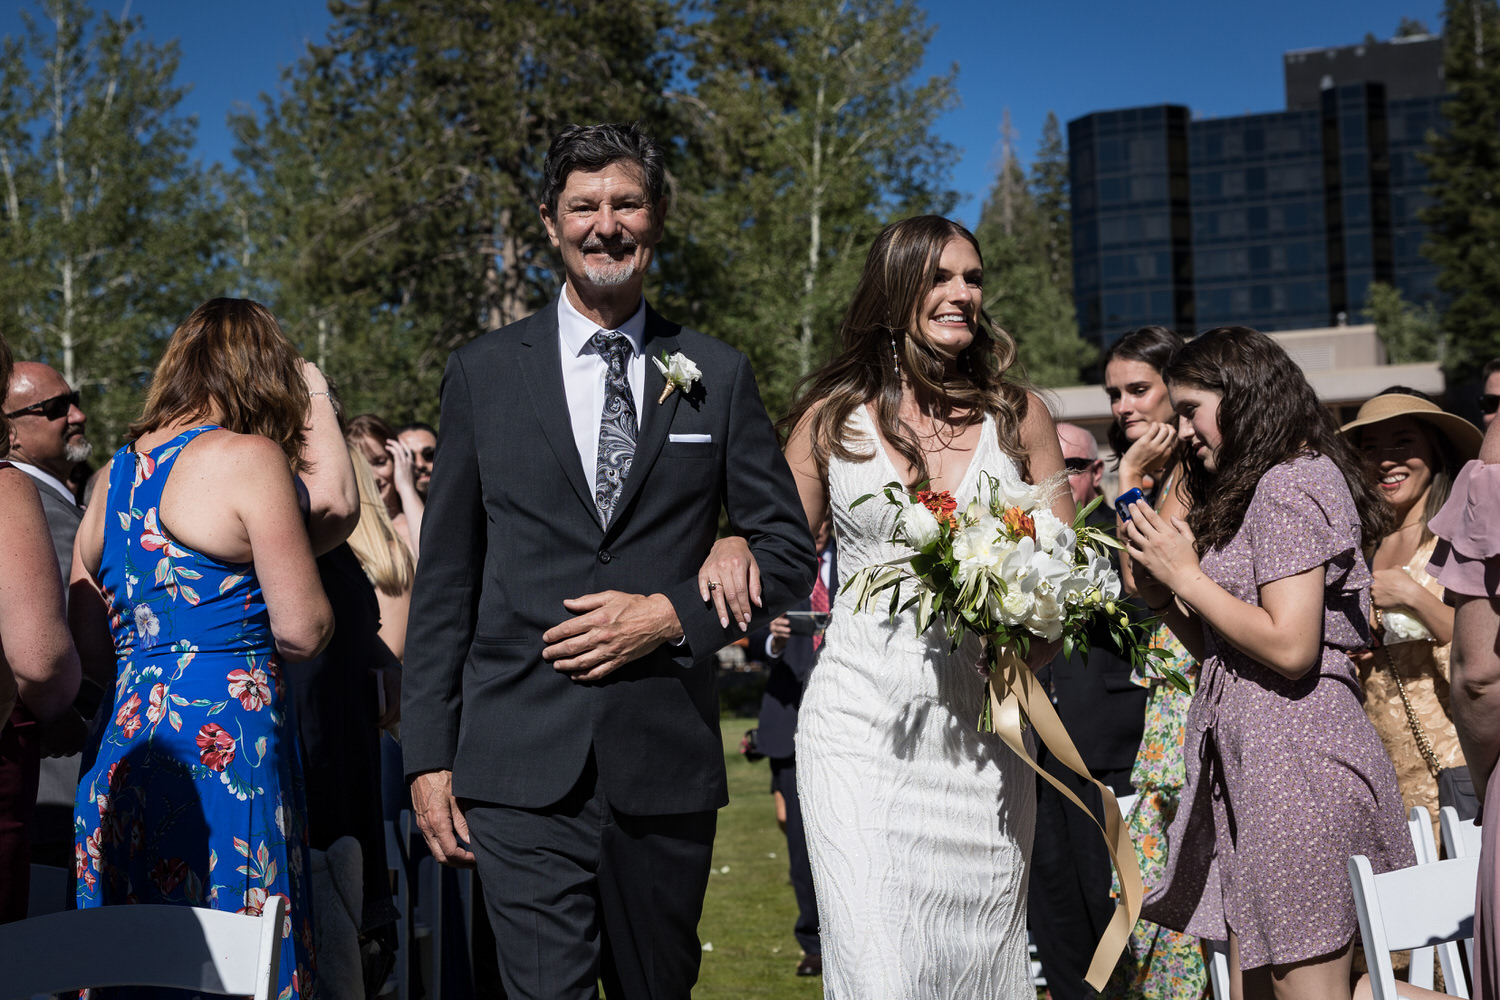 The father of the bride walks his daughter down the aisle at an outdoor summertime wedding at Everline Resort and Spa.